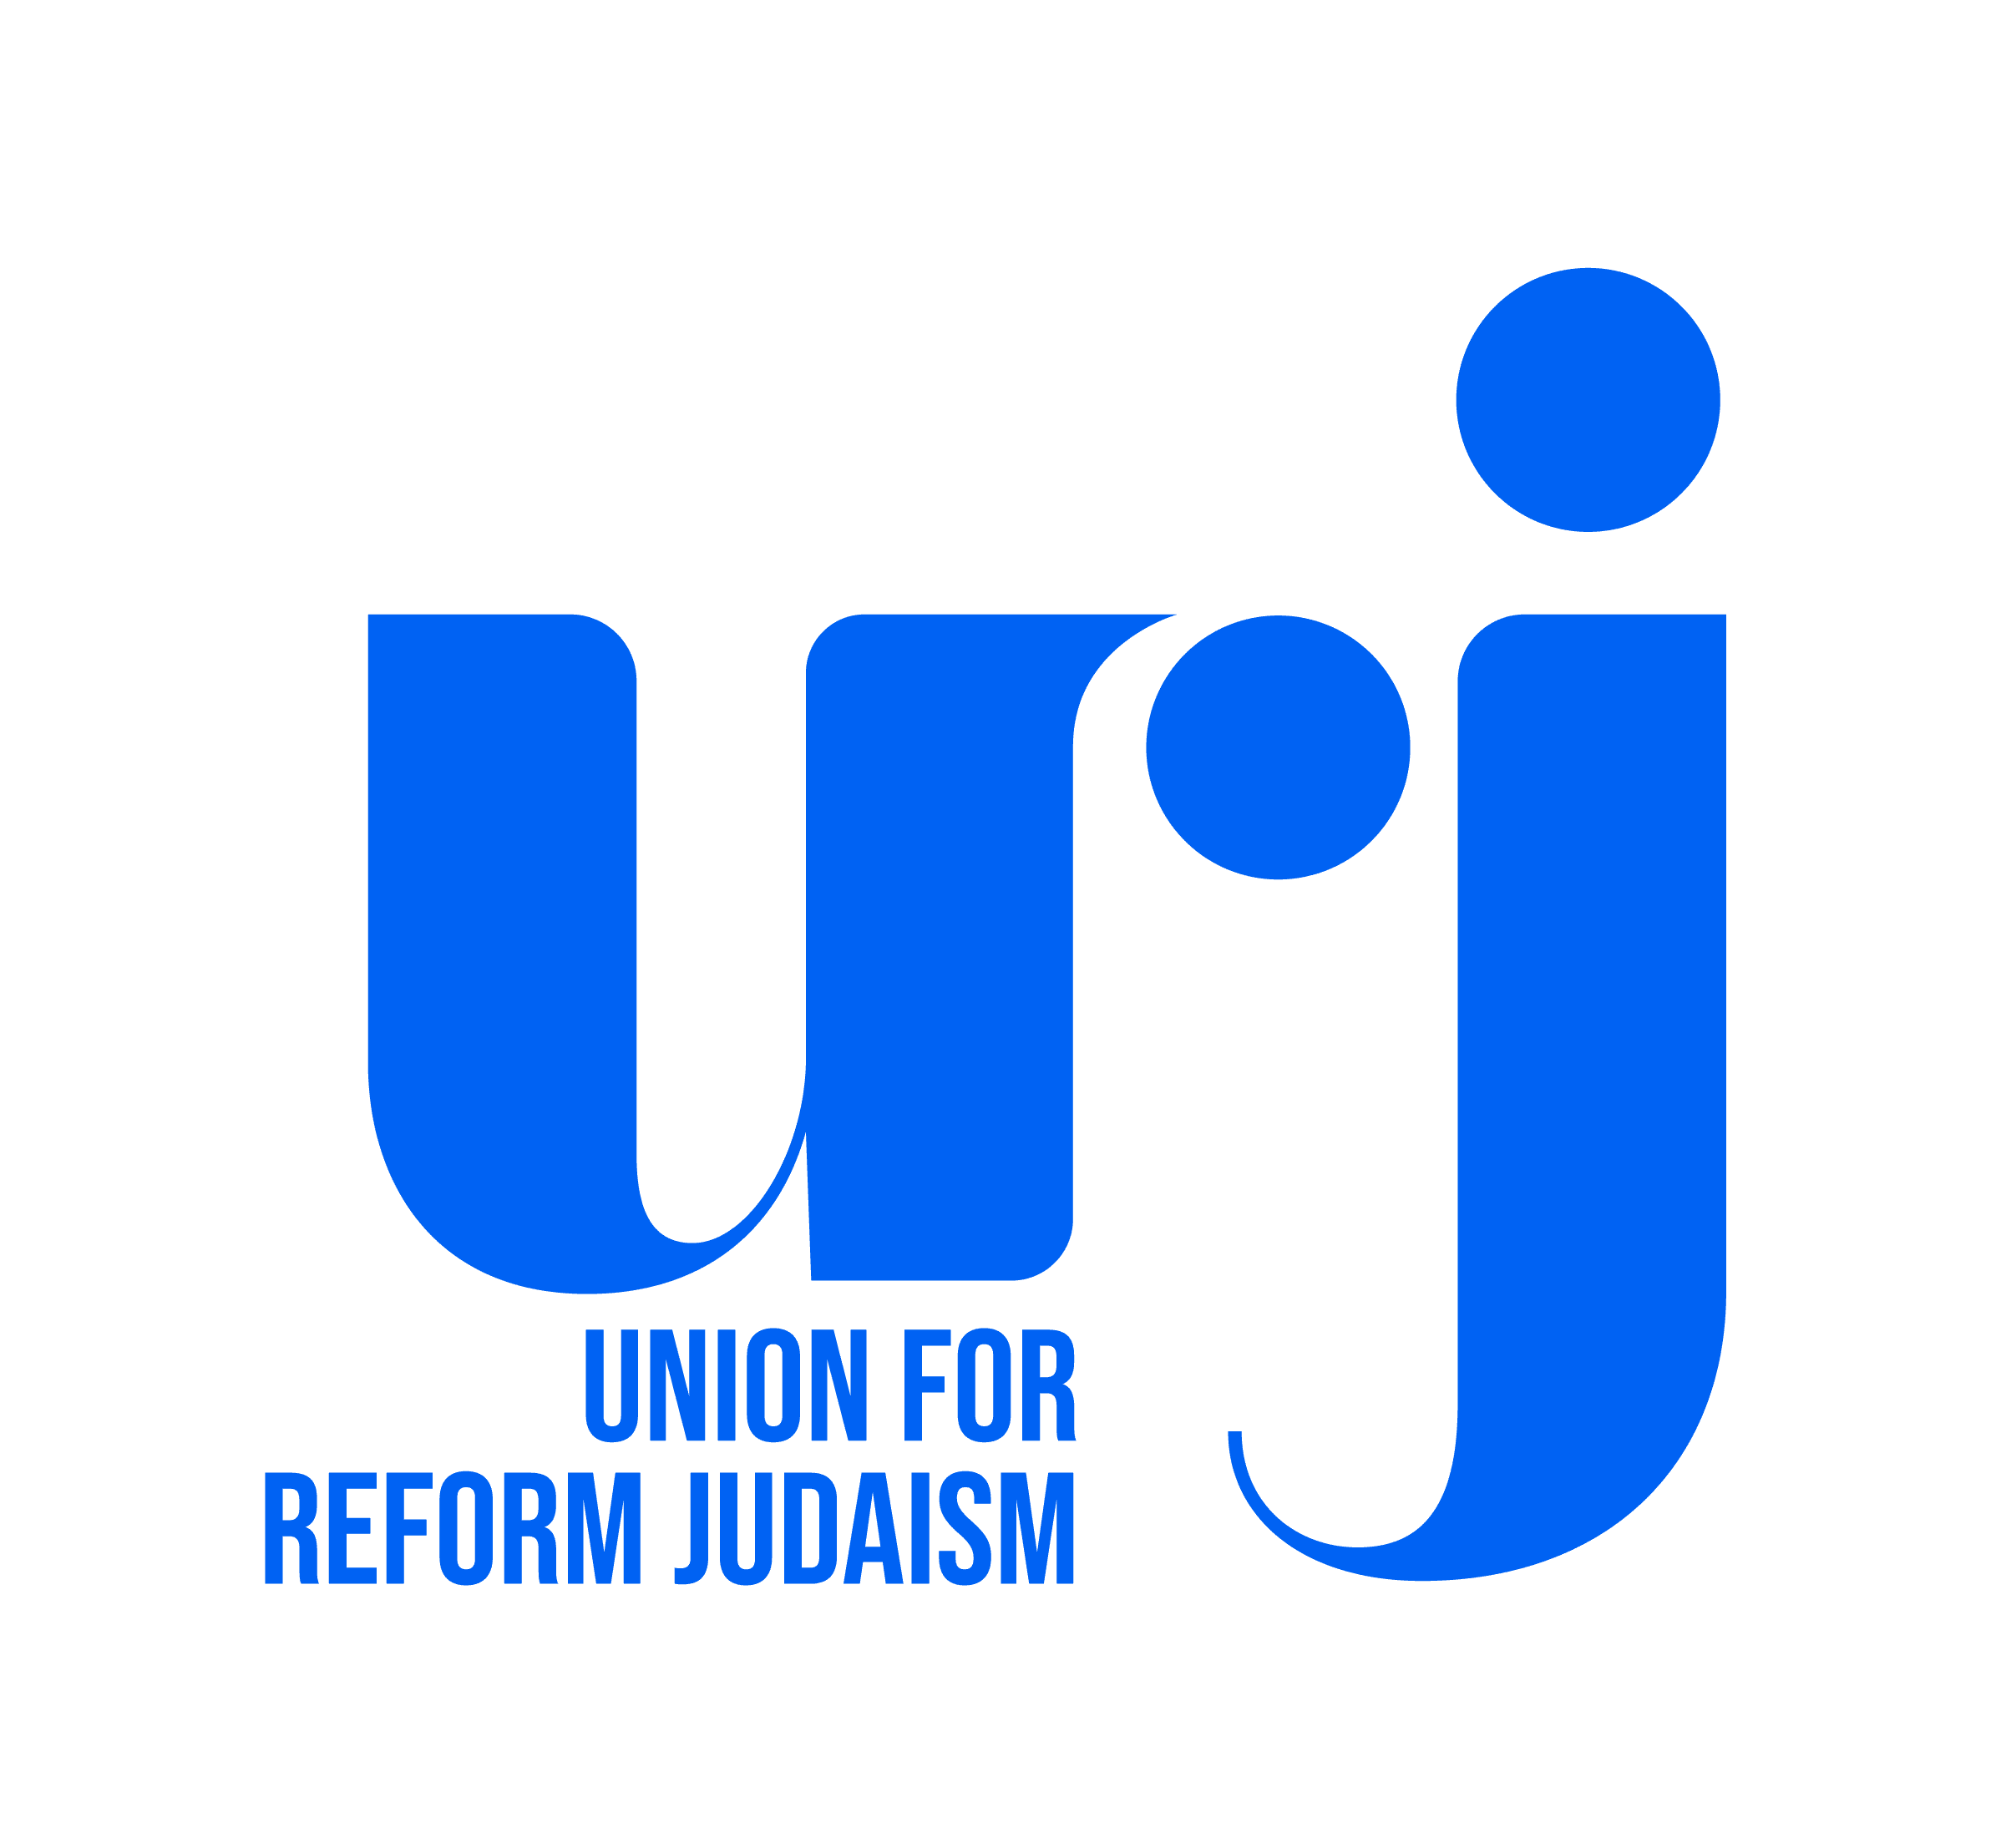 Affiliated with the Union for Reform Judaism (URJ)